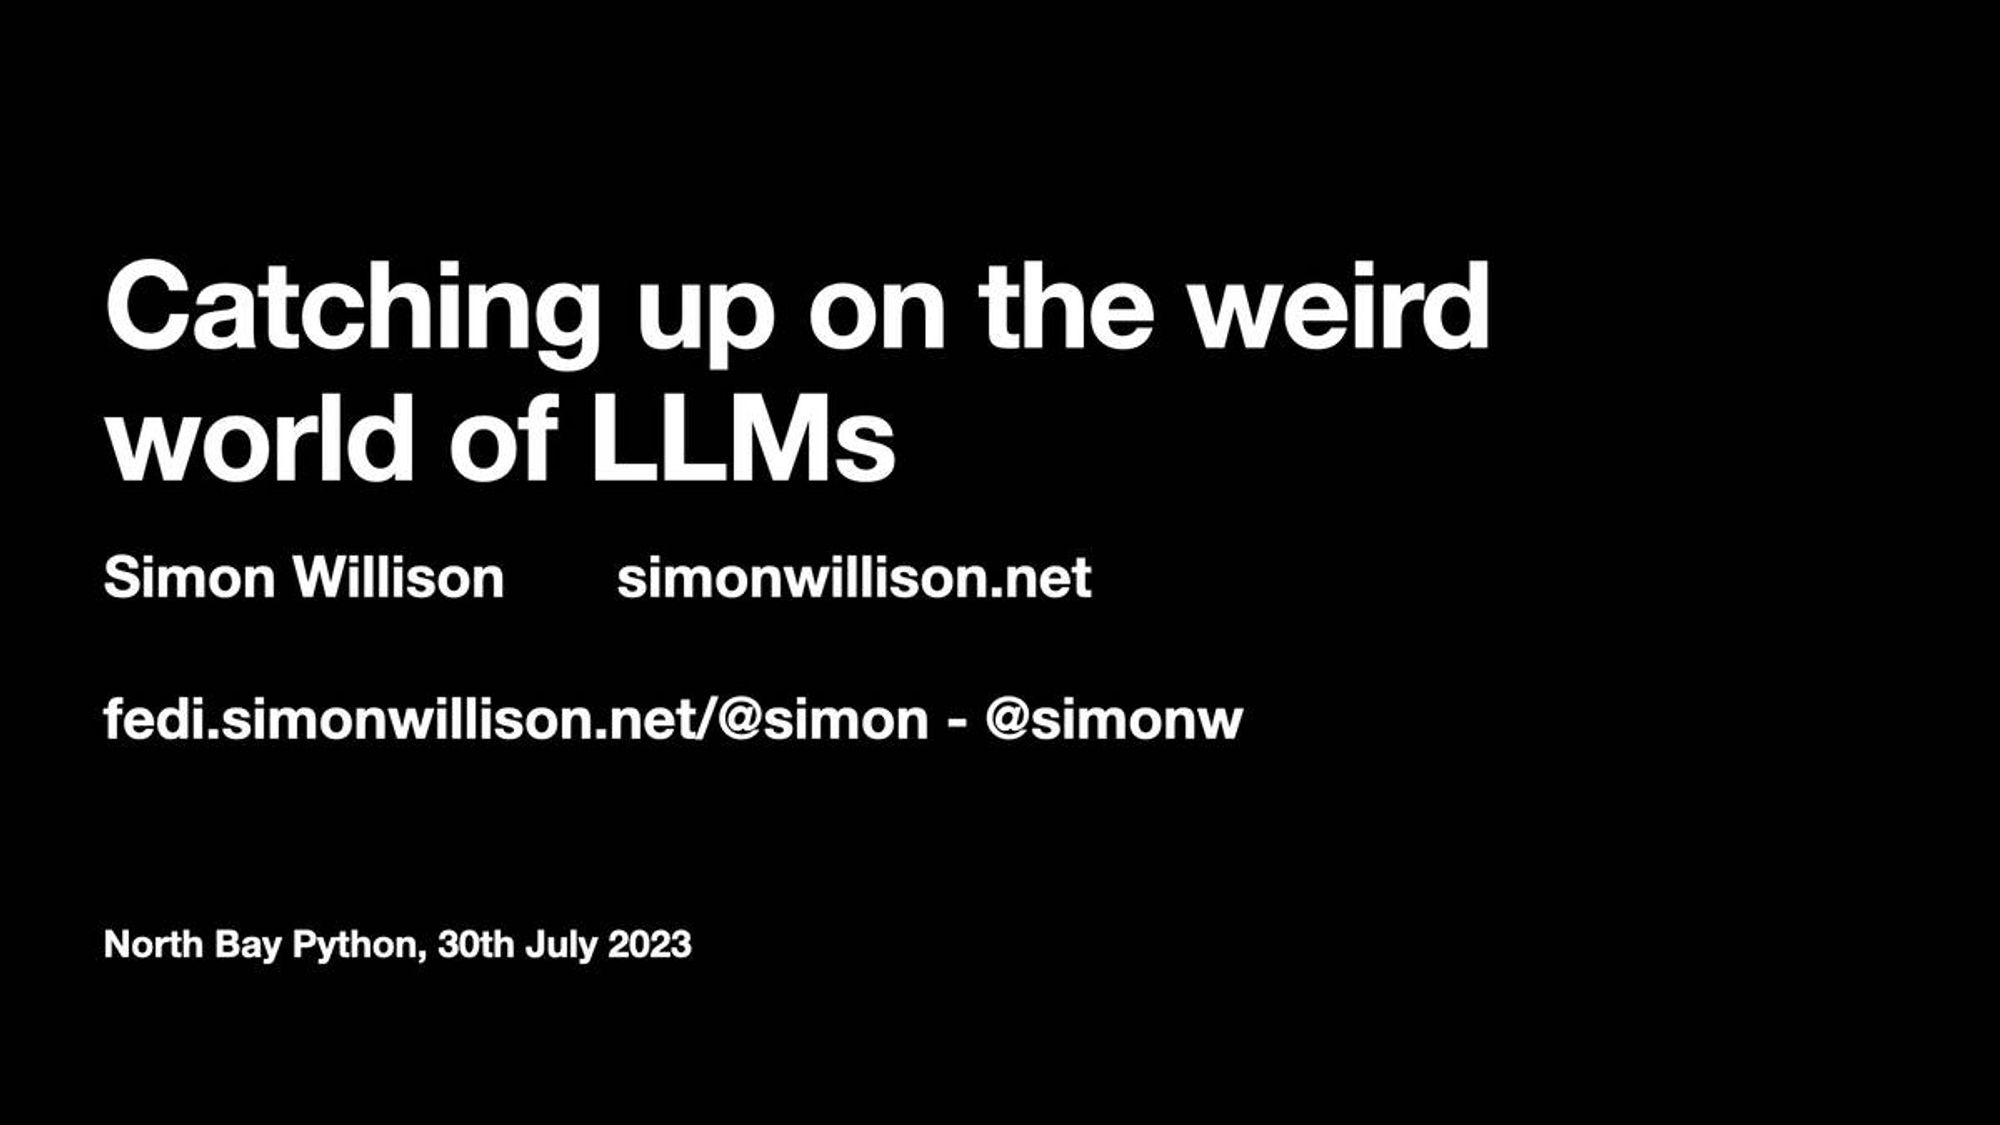 Catching up on the weird world of LLMs